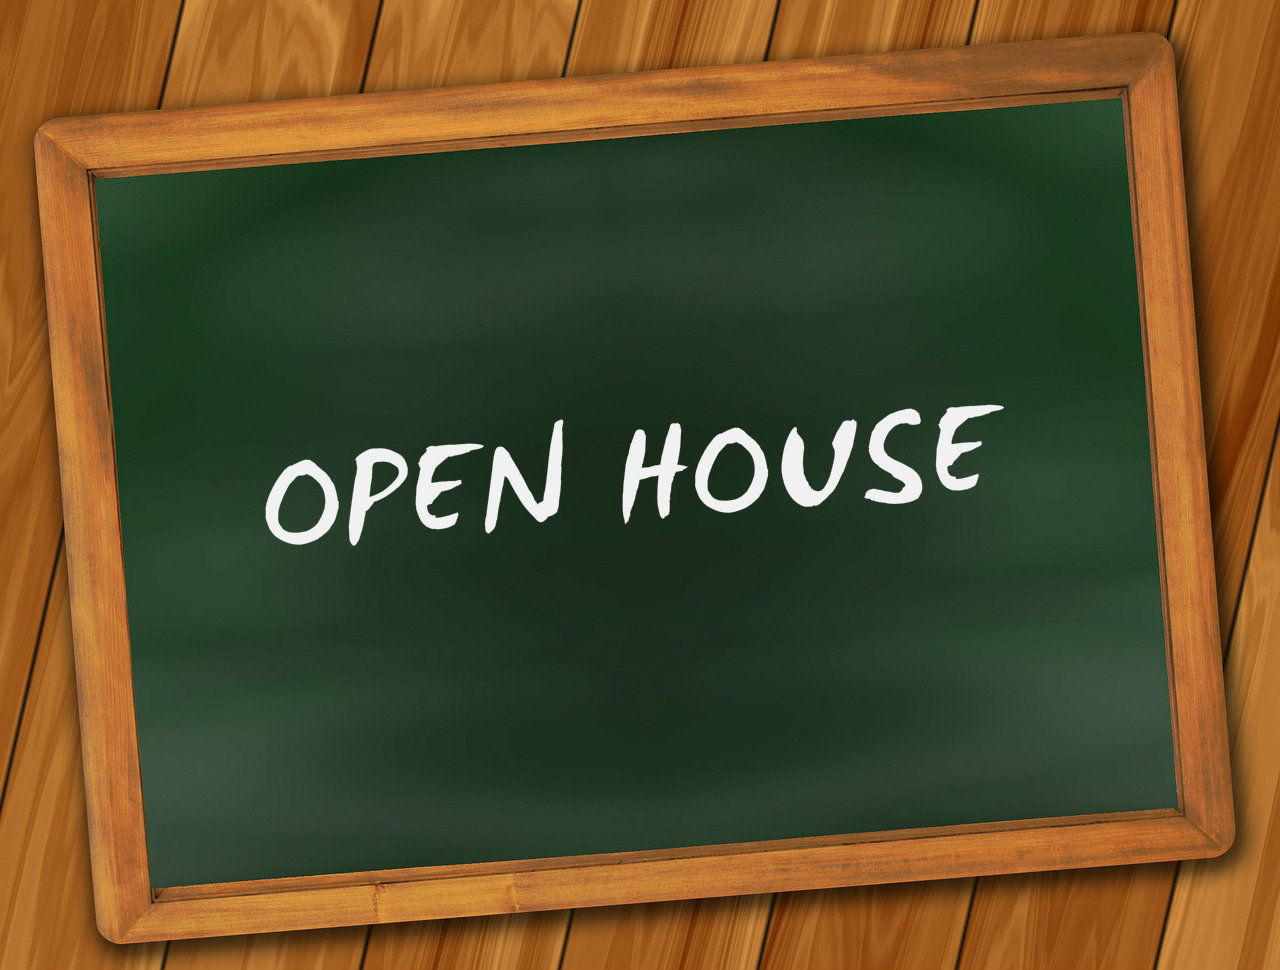 It Takes More Than an Open House to Market Schools